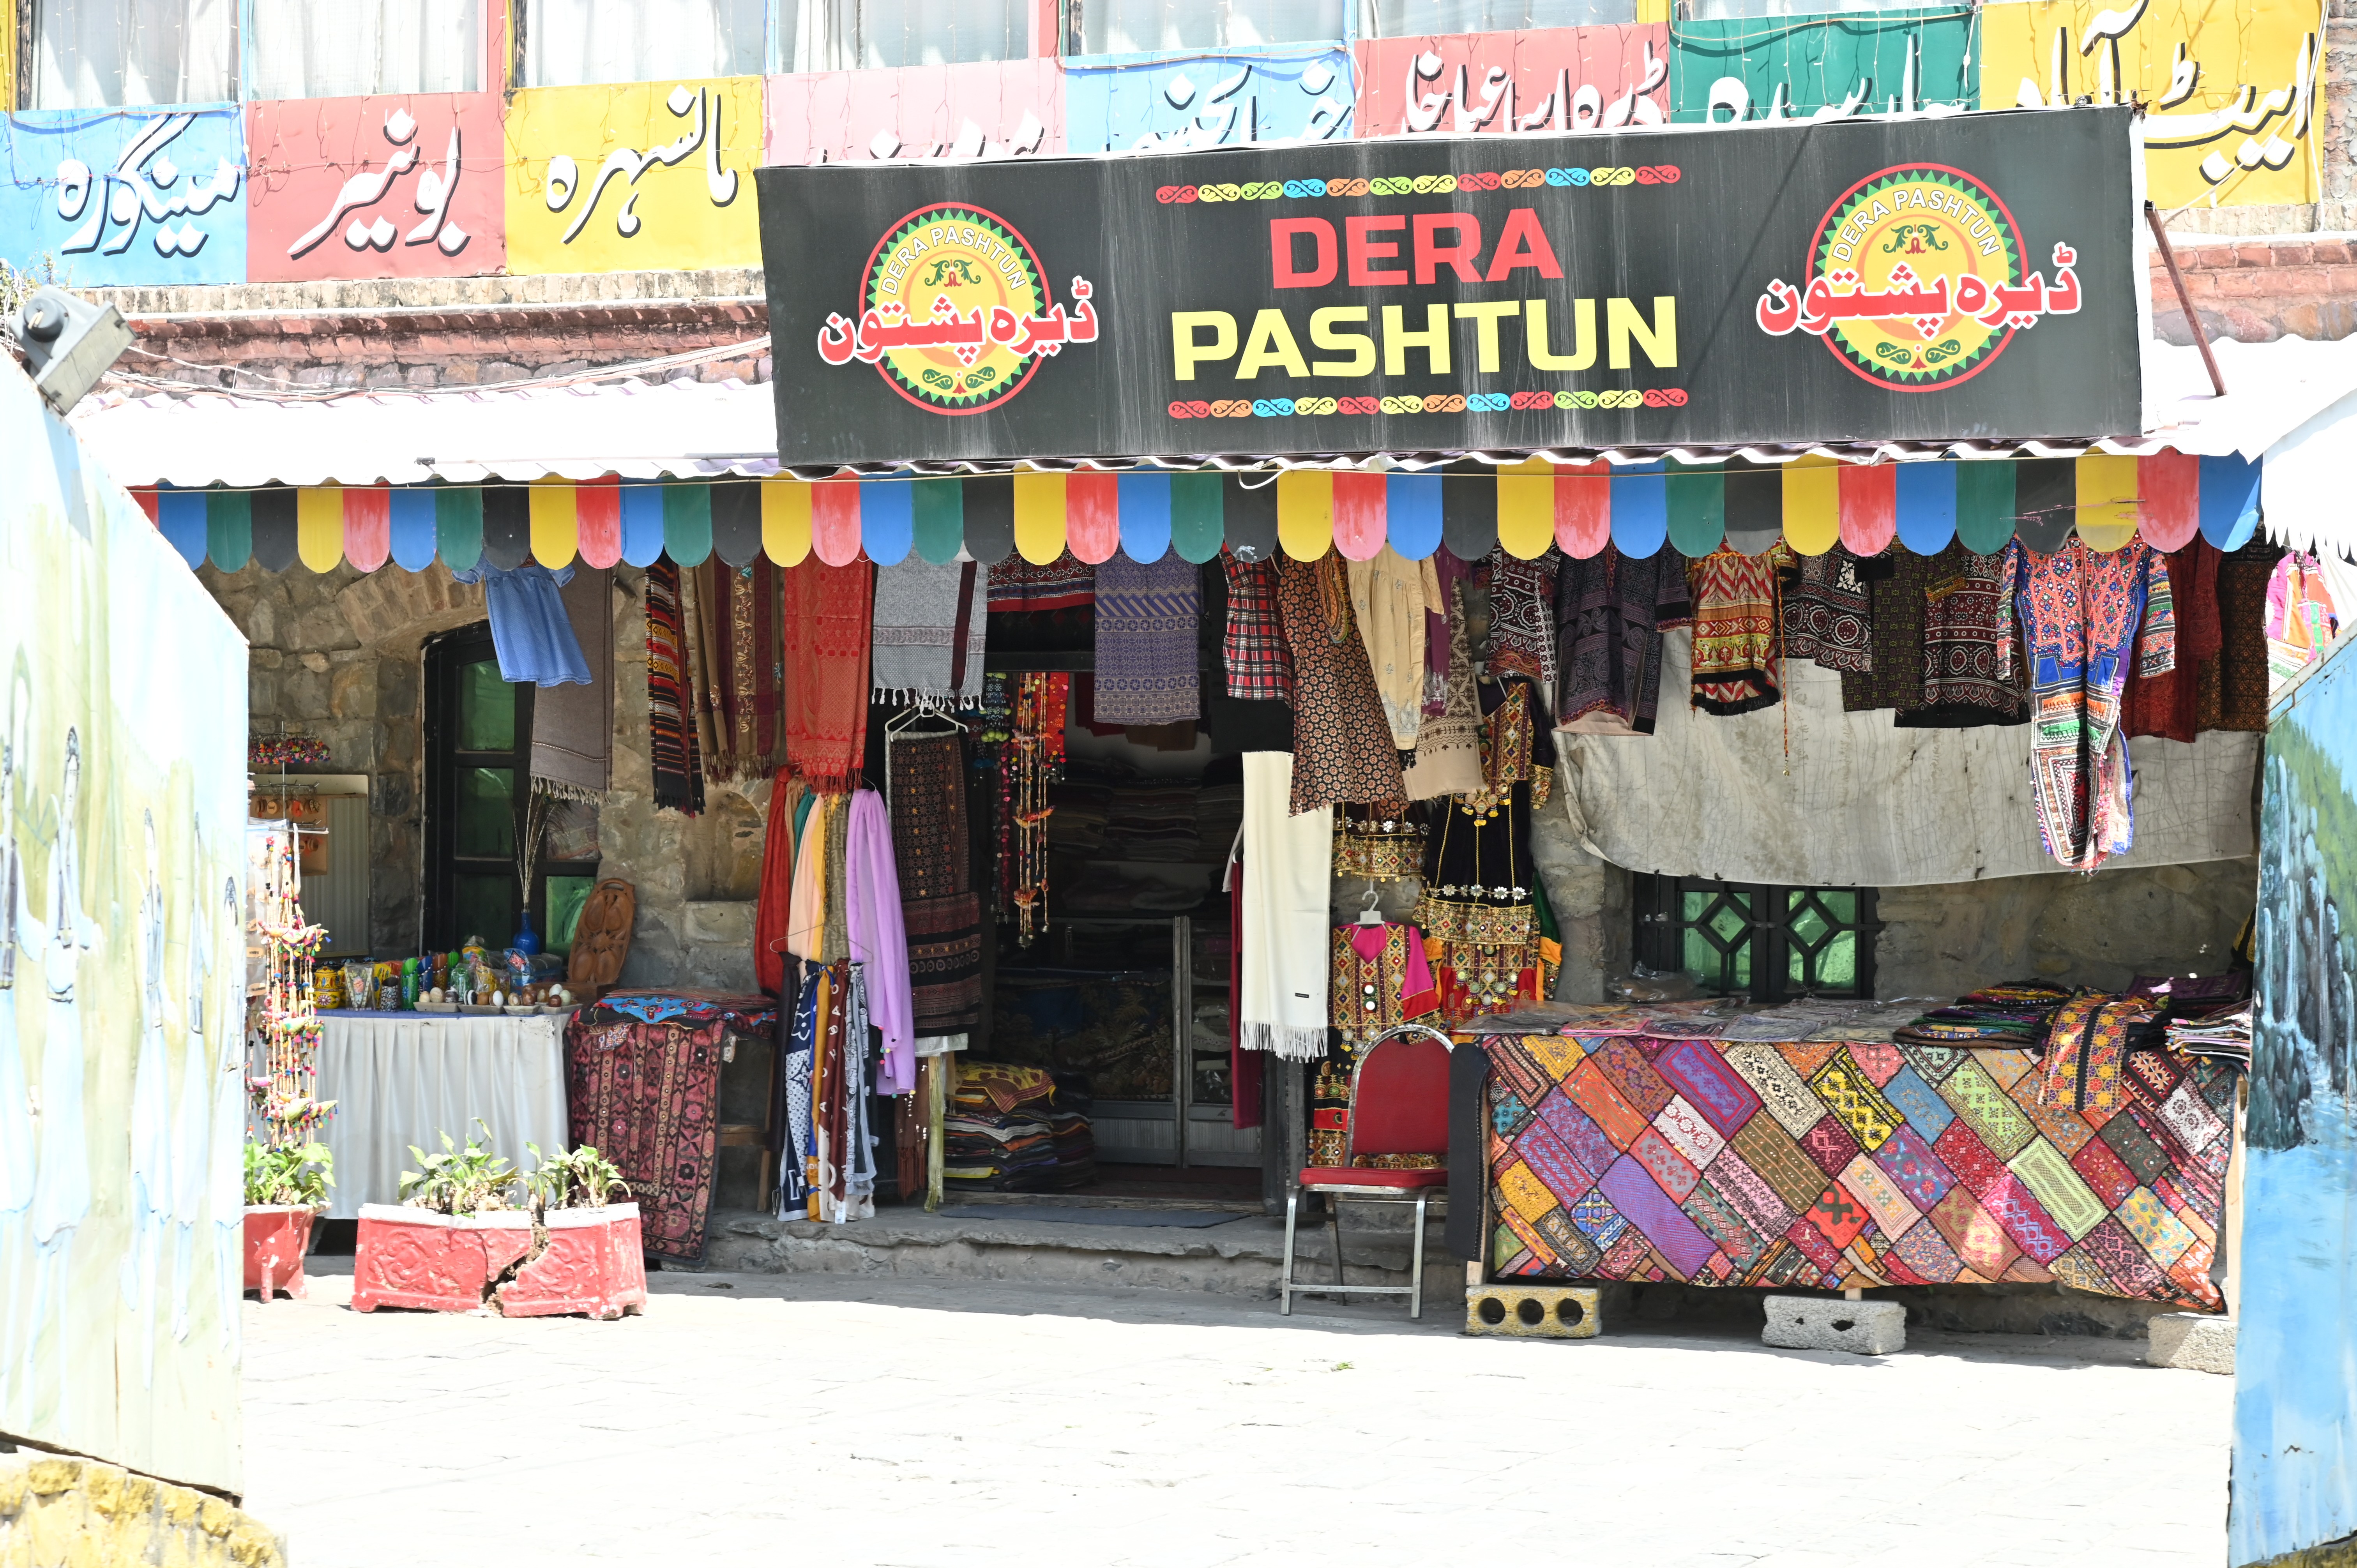 Dera Pashtun in Saidpur Village, alive with tradition, welcomes tourists with its colorful charm